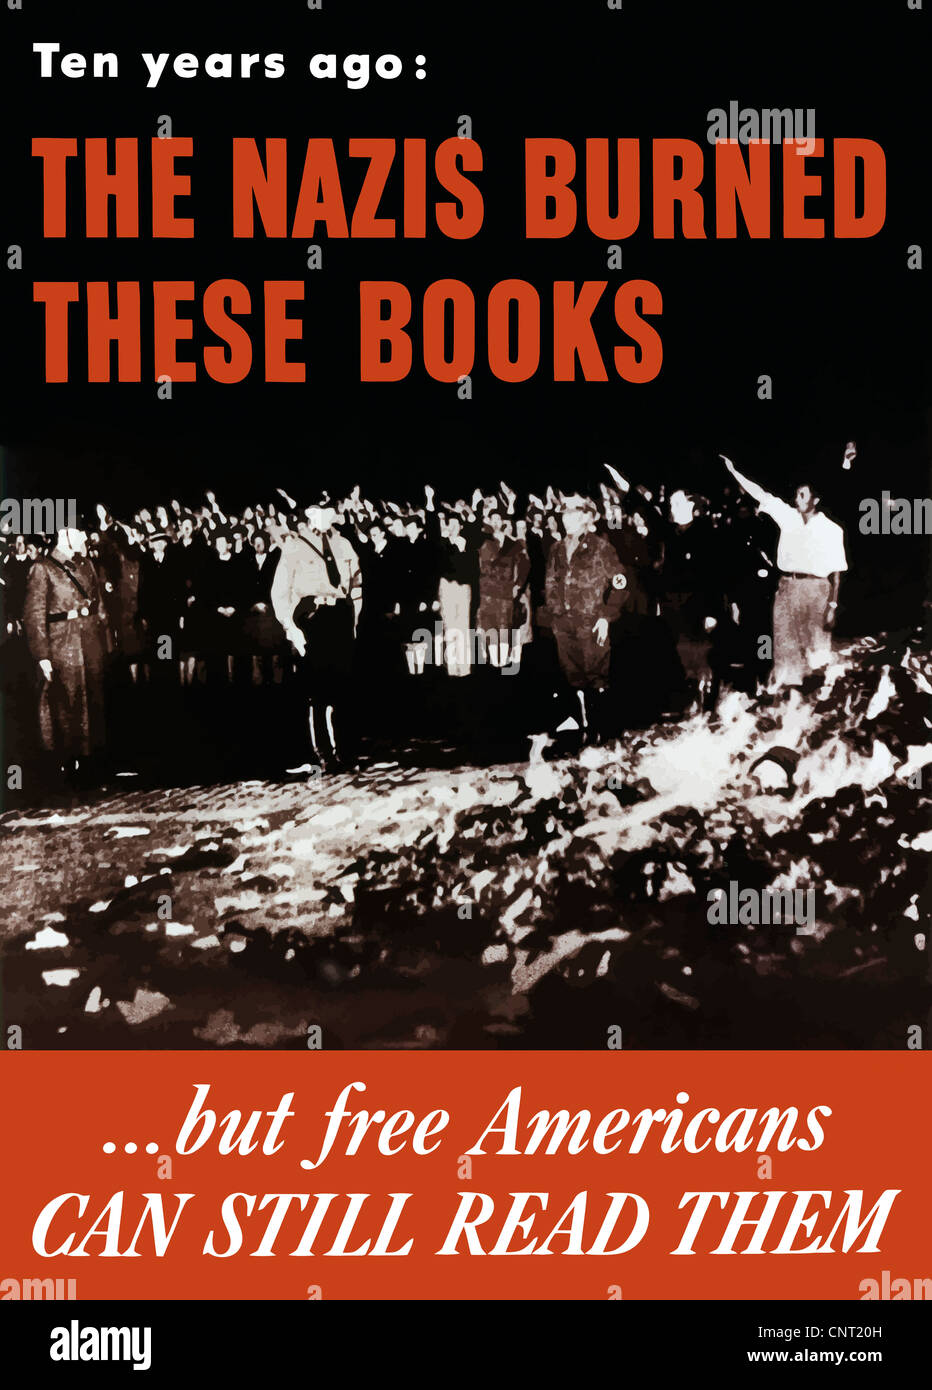 This vintage World War II poster features Nazis at a book burning. Stock Photo